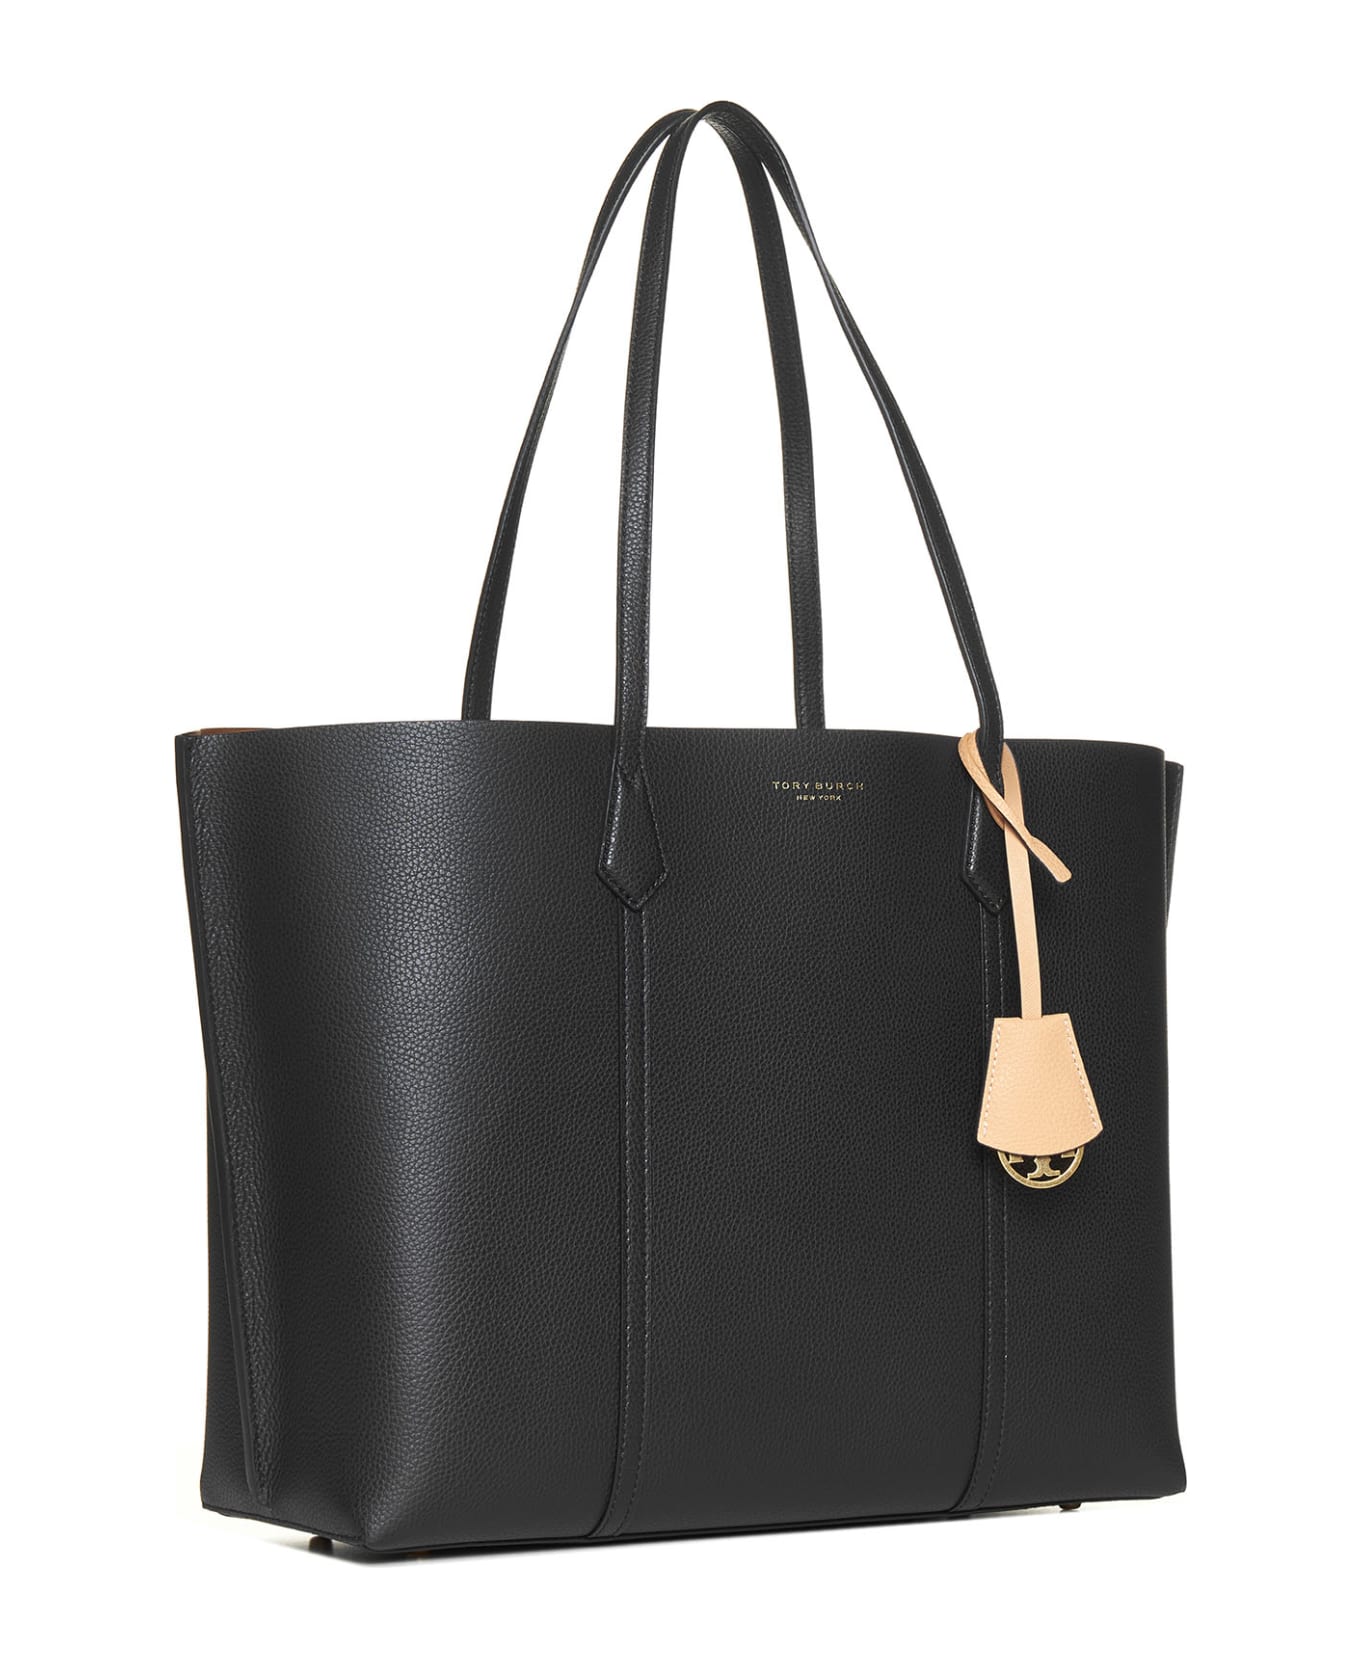 Tory Burch Perry Triple Compartment Tote Bag - black トートバッグ